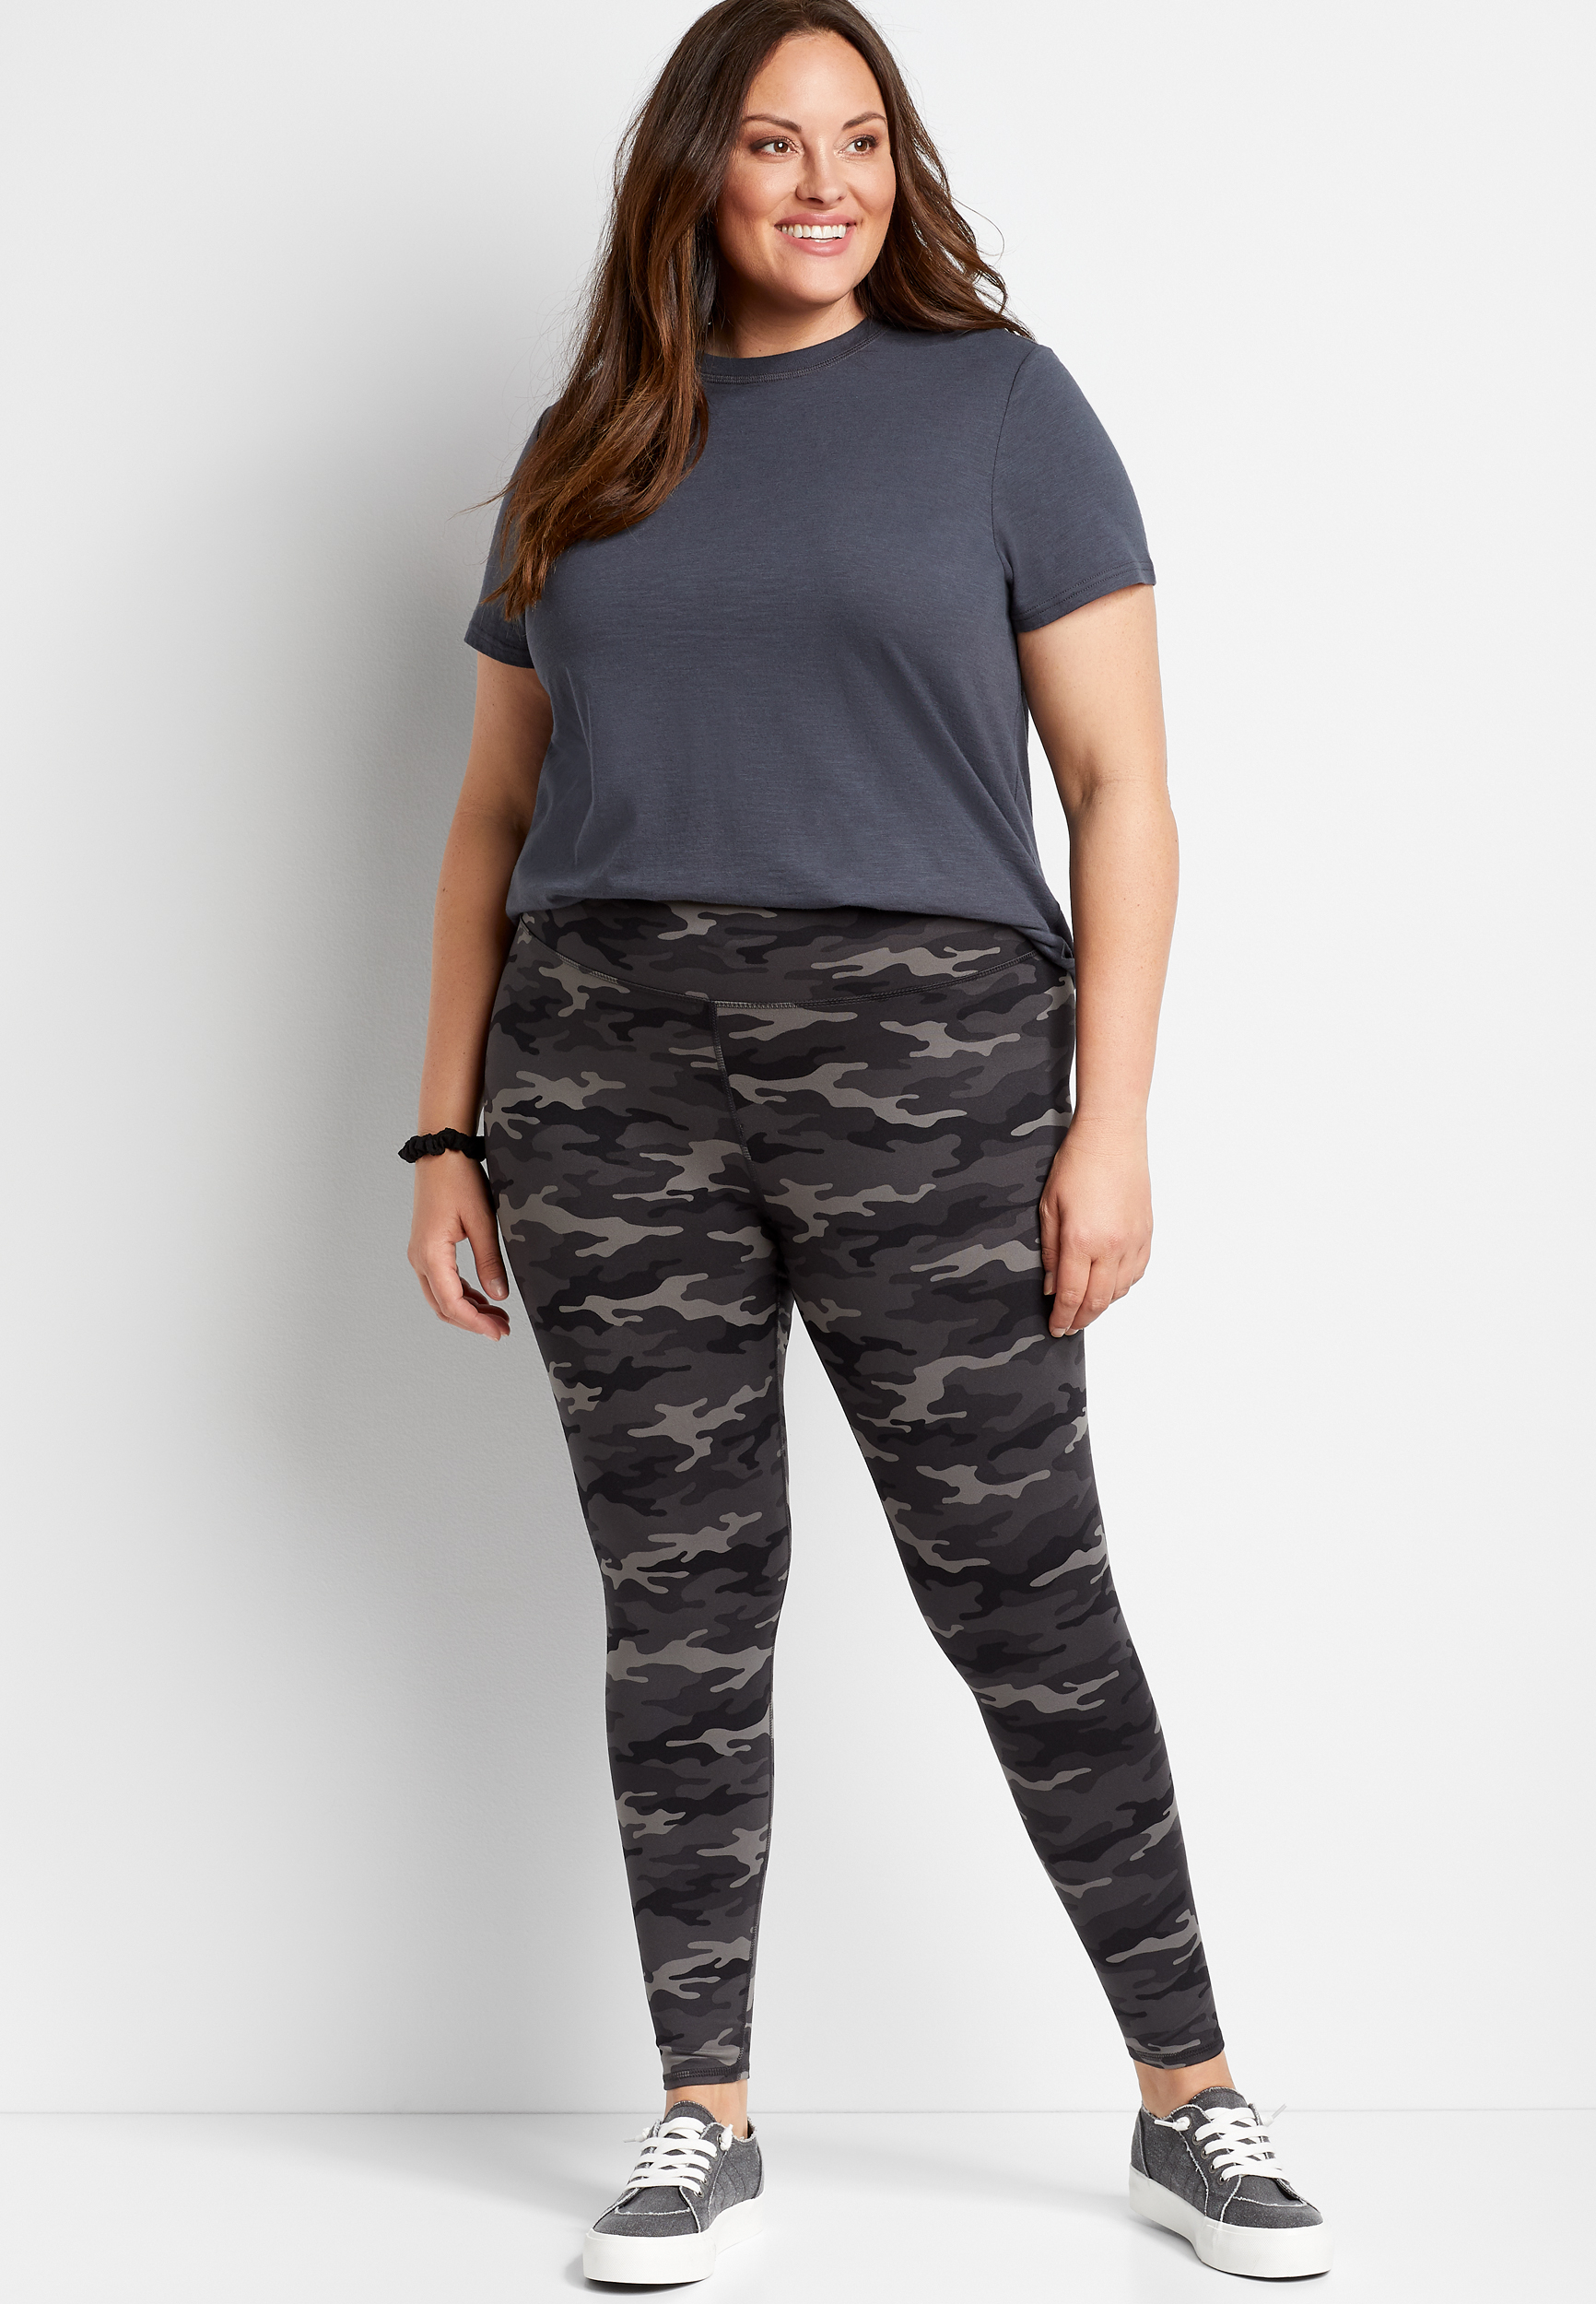 Plus Size Camo Print, Full Length Leggings In A Slim Fitting Style Wit –  KYI Beauty Boutique